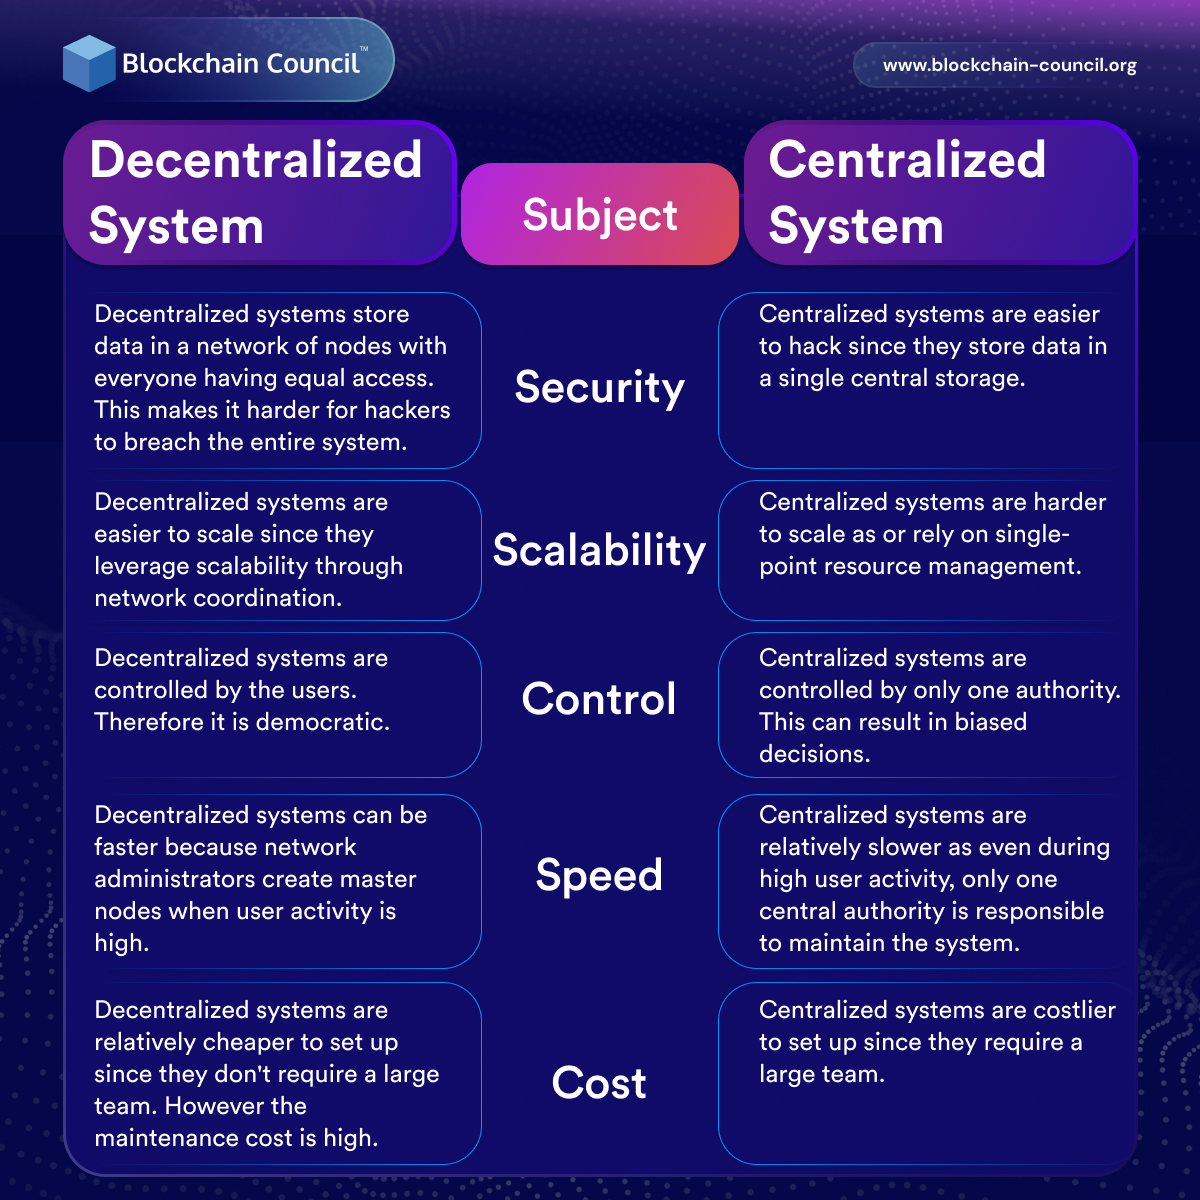 Comparison between Decentralized and Centralized Systems